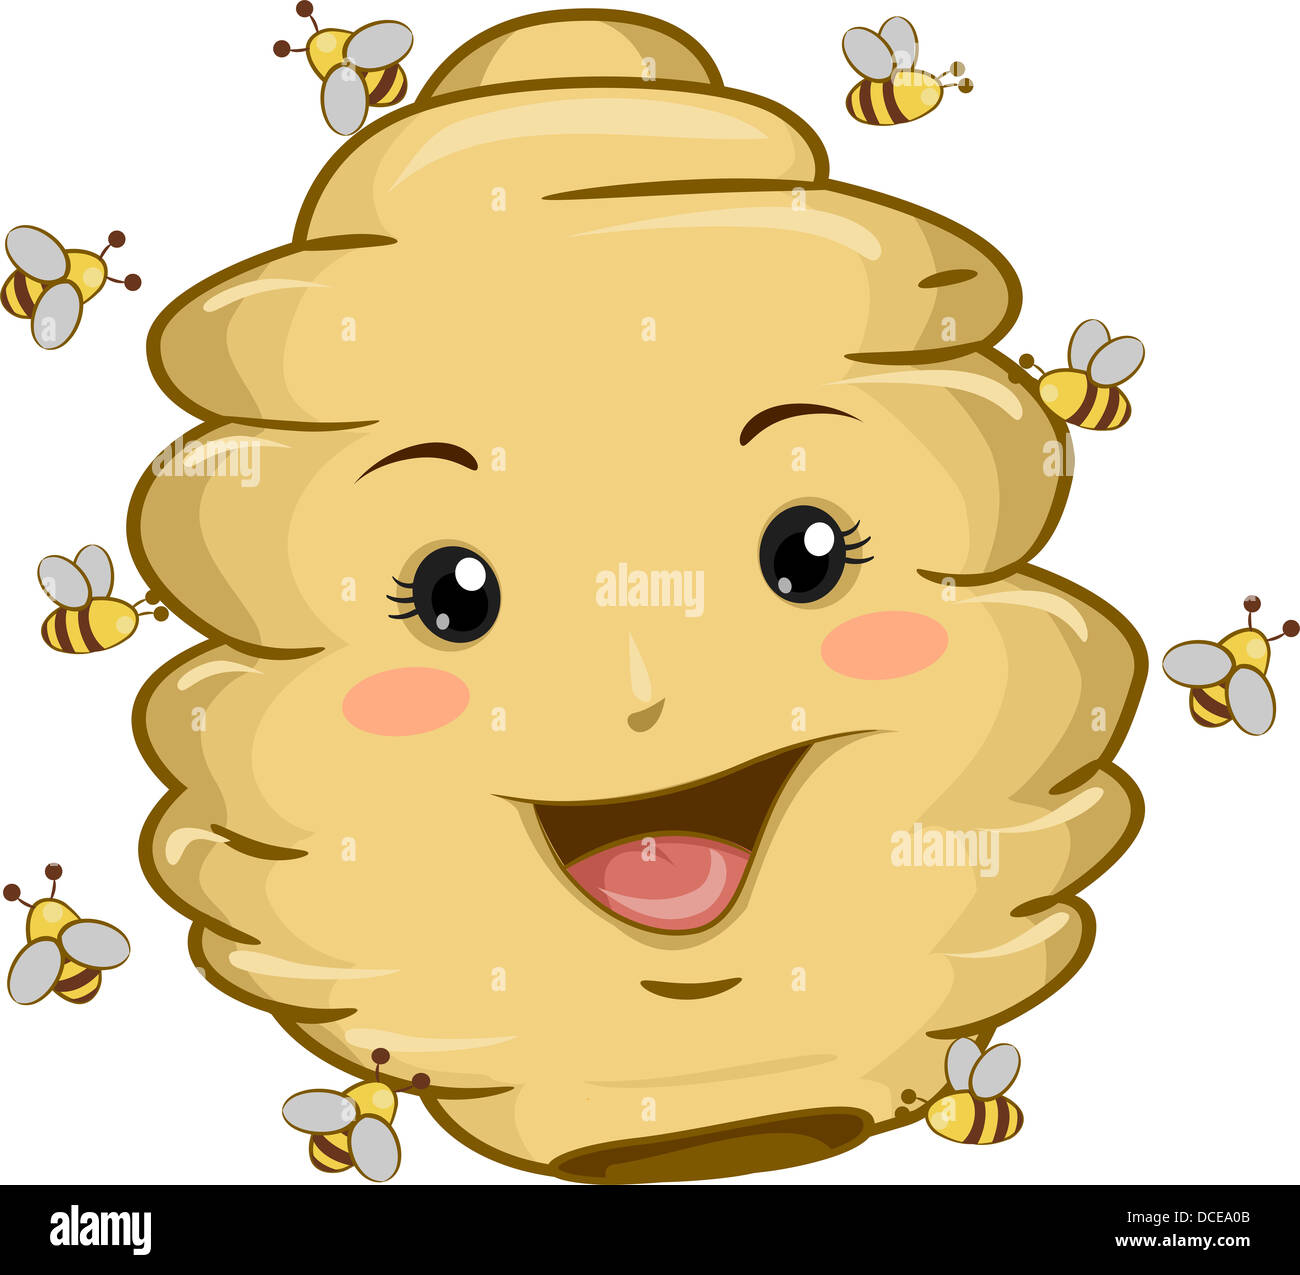 Illustration of Beehive Mascot with Bees Stock Photo